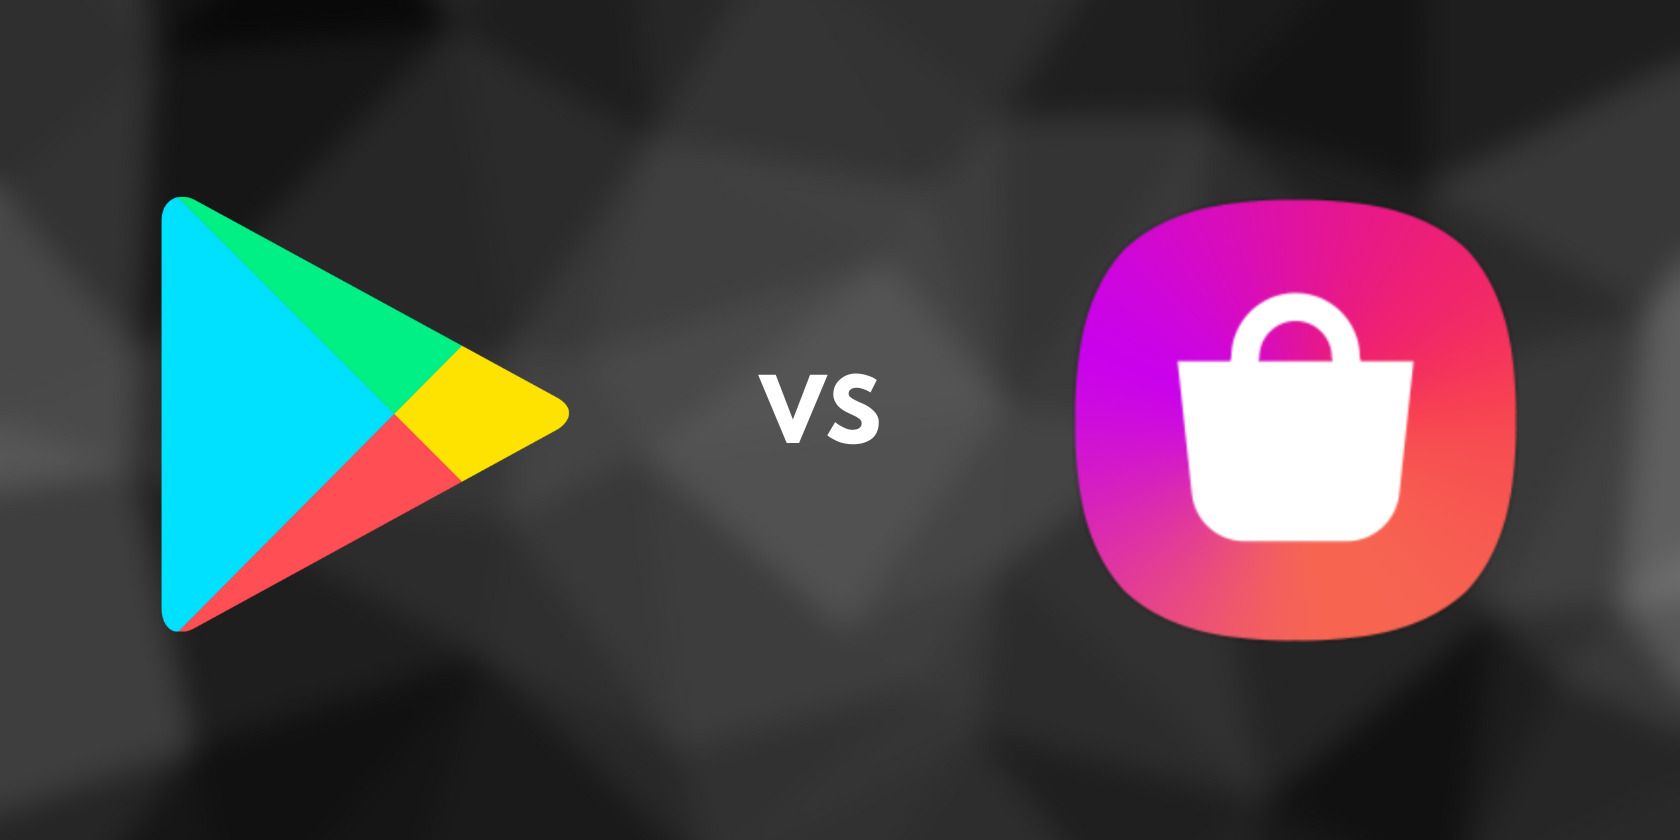 Google Play Store vs. Samsung Galaxy Store: What's the Difference and Which Should You Use?